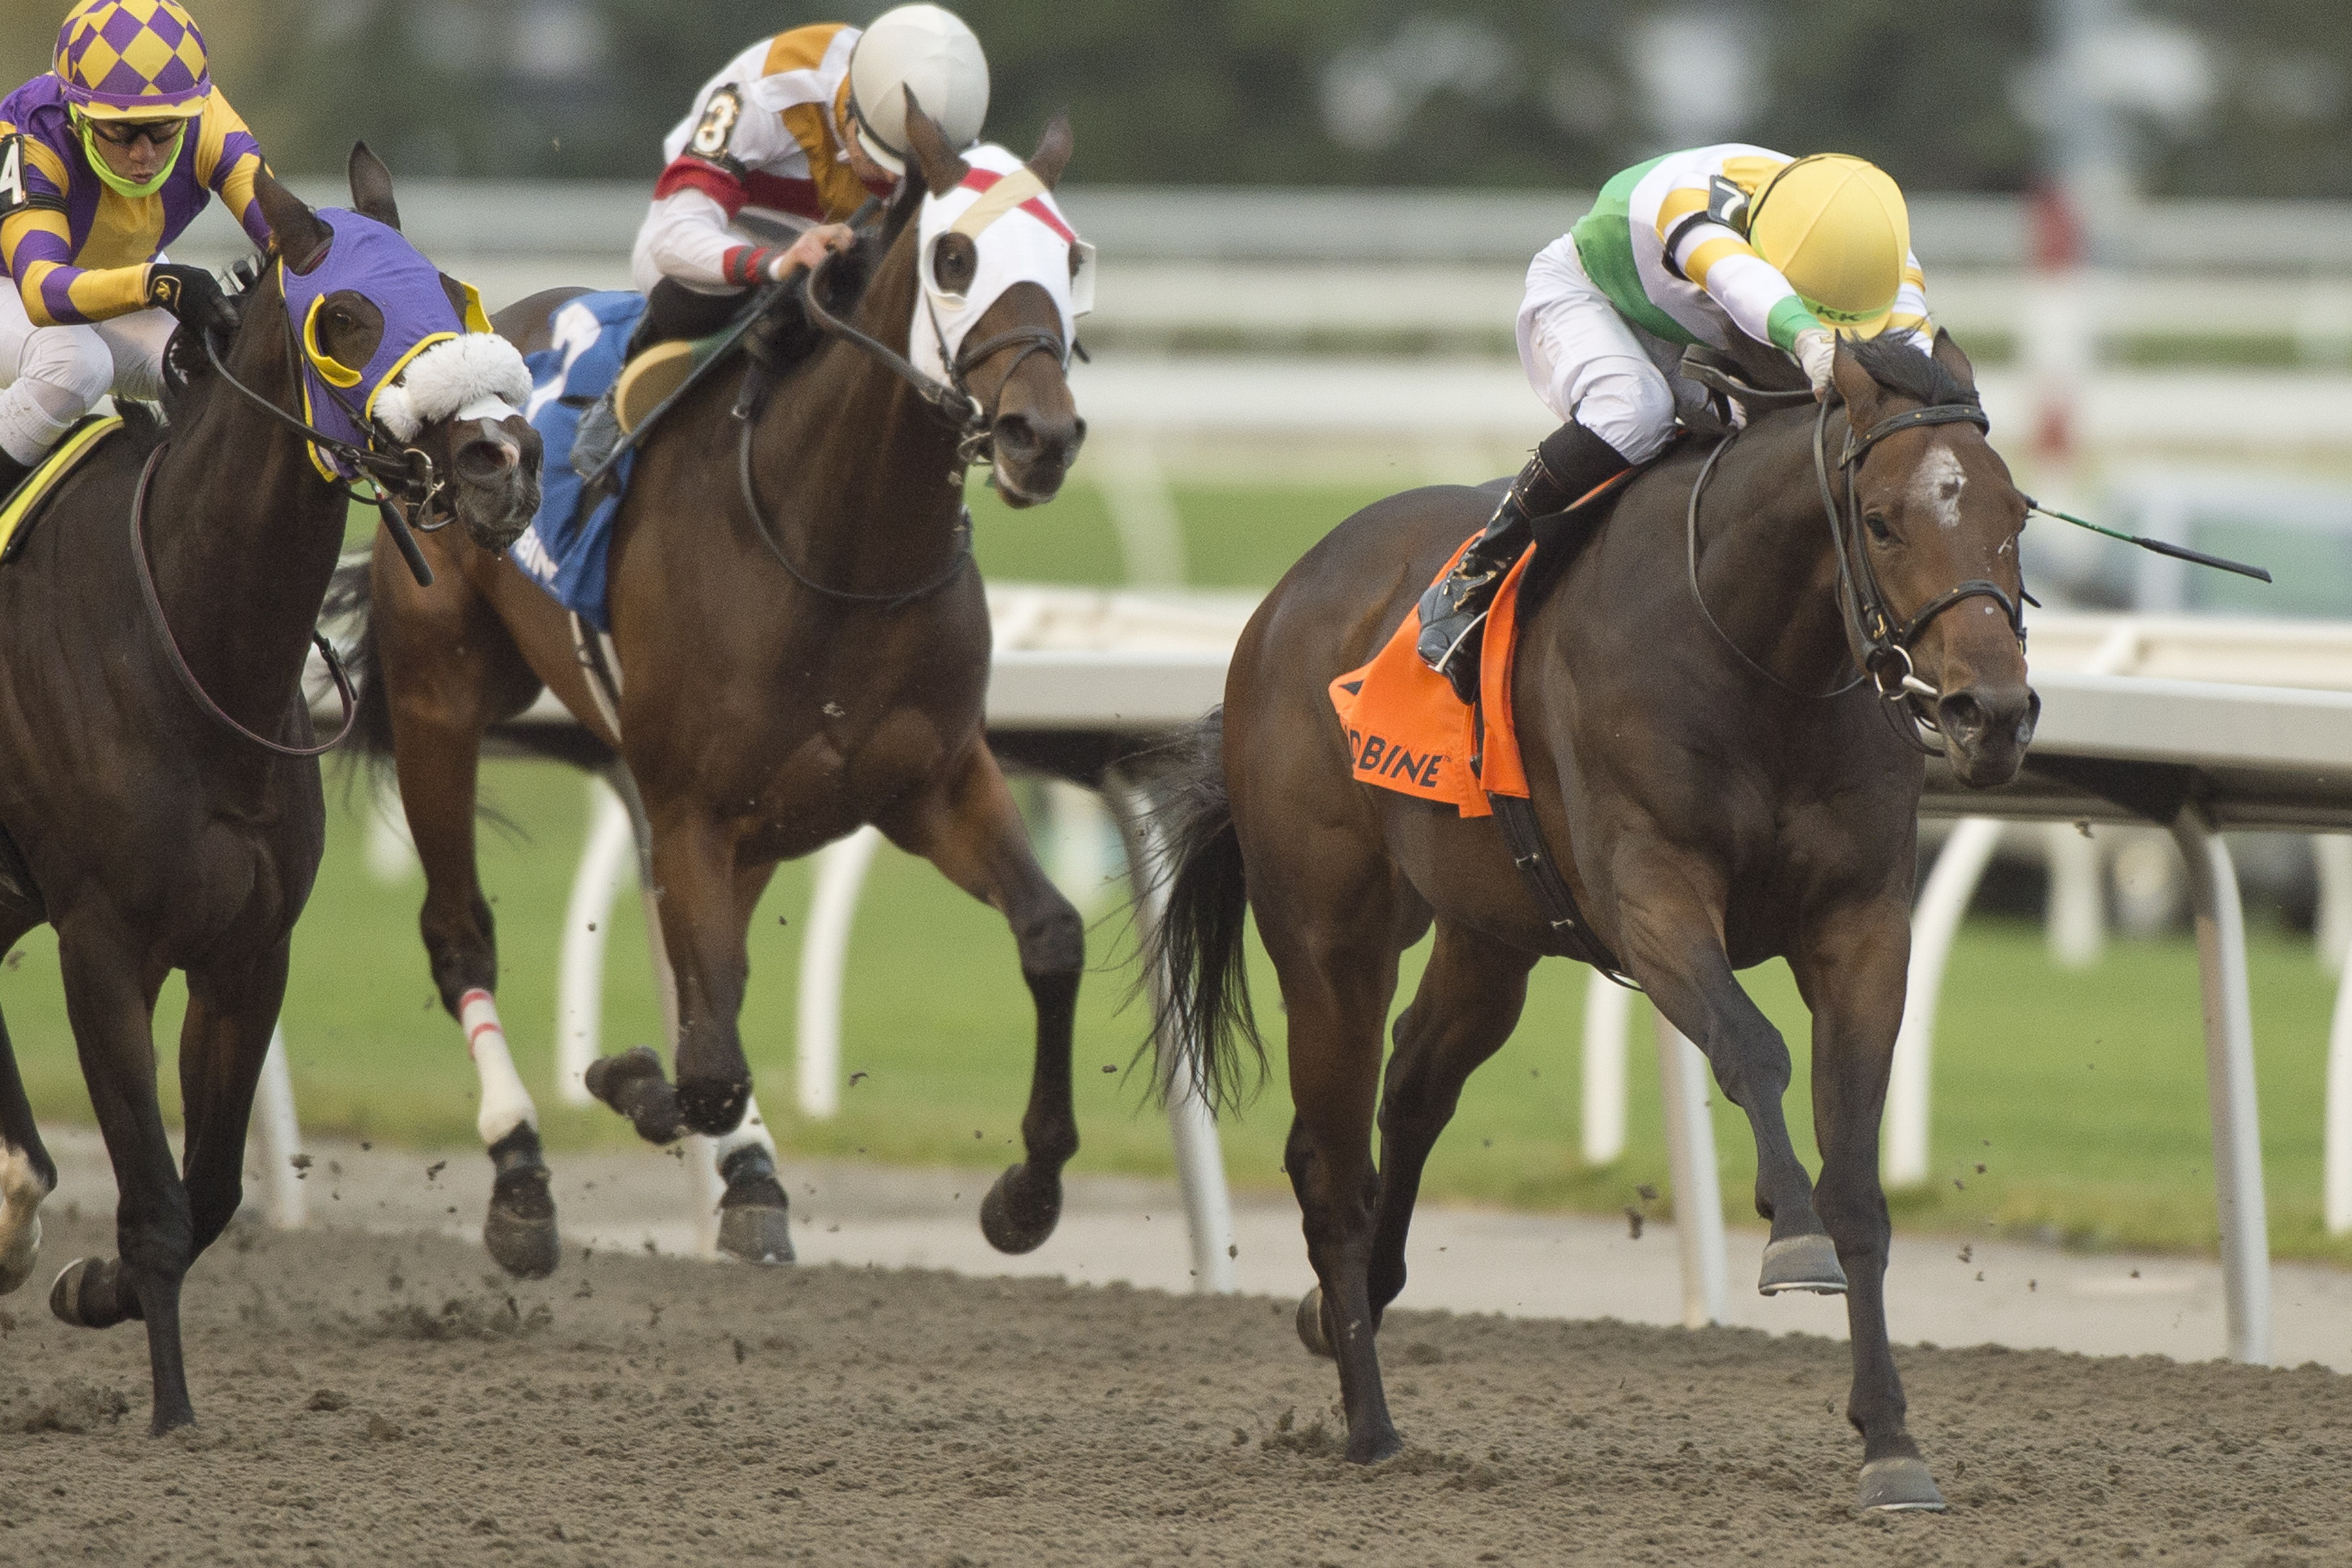 Touch’n Ride Elevated to First in G3 Ontario Derby